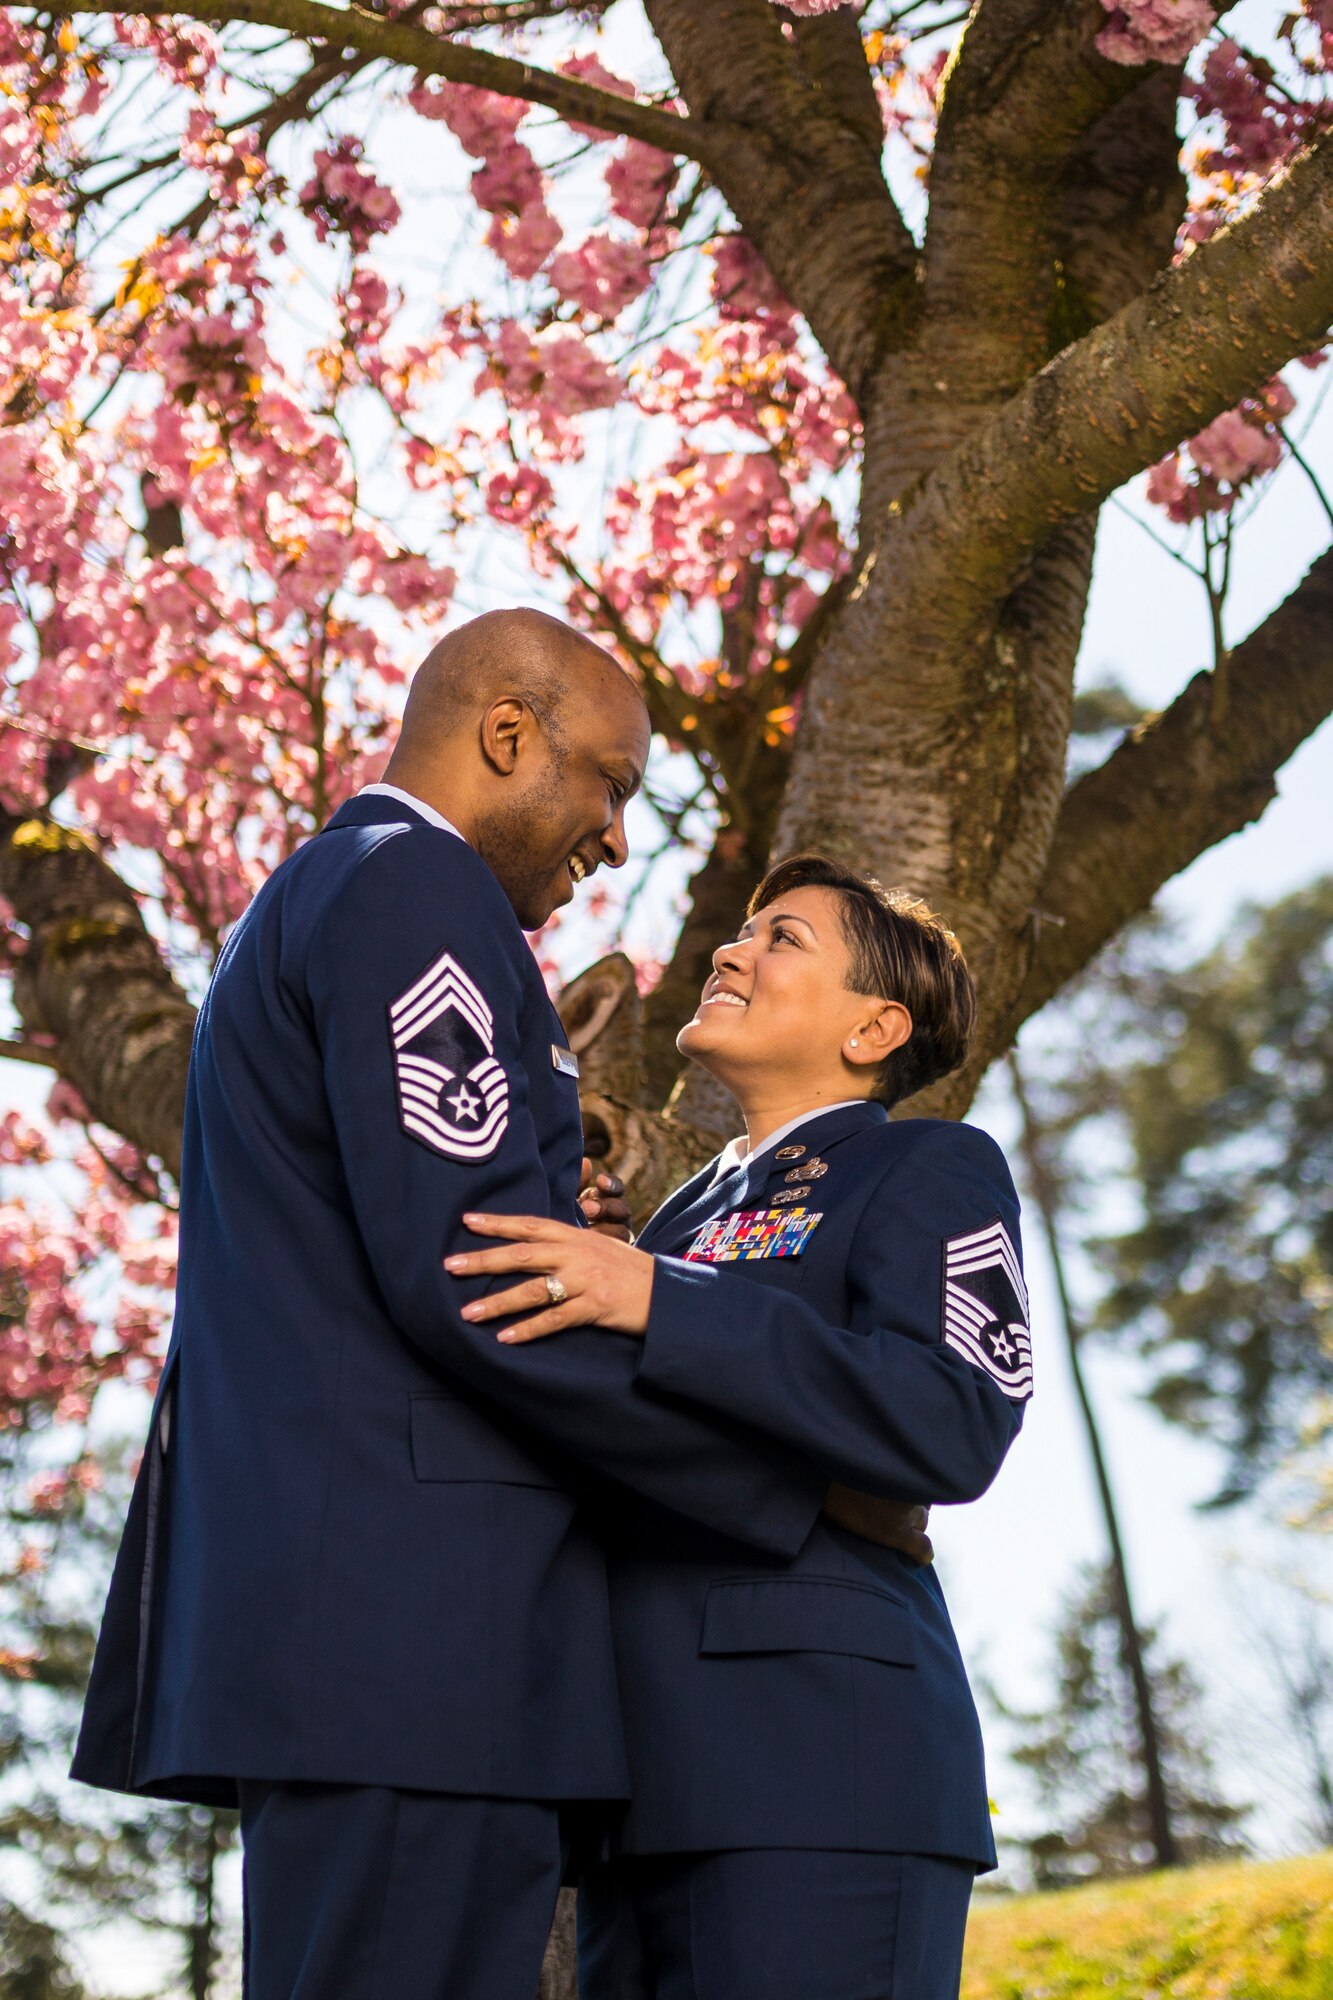 Retired U.S. Air Force Chief Master Sgt. Robinson Joseph, former U.S. Air Forces in Europe – Air Forces Africa Chief Enlisted Manager for the Air Force Installation Contracting Center, and his wife, retired Chief Master Sgt. Leenette Joseph, former USAFE Equal Opportunity functional manager, spent 14 years as a military-to-military couple before retiring together.